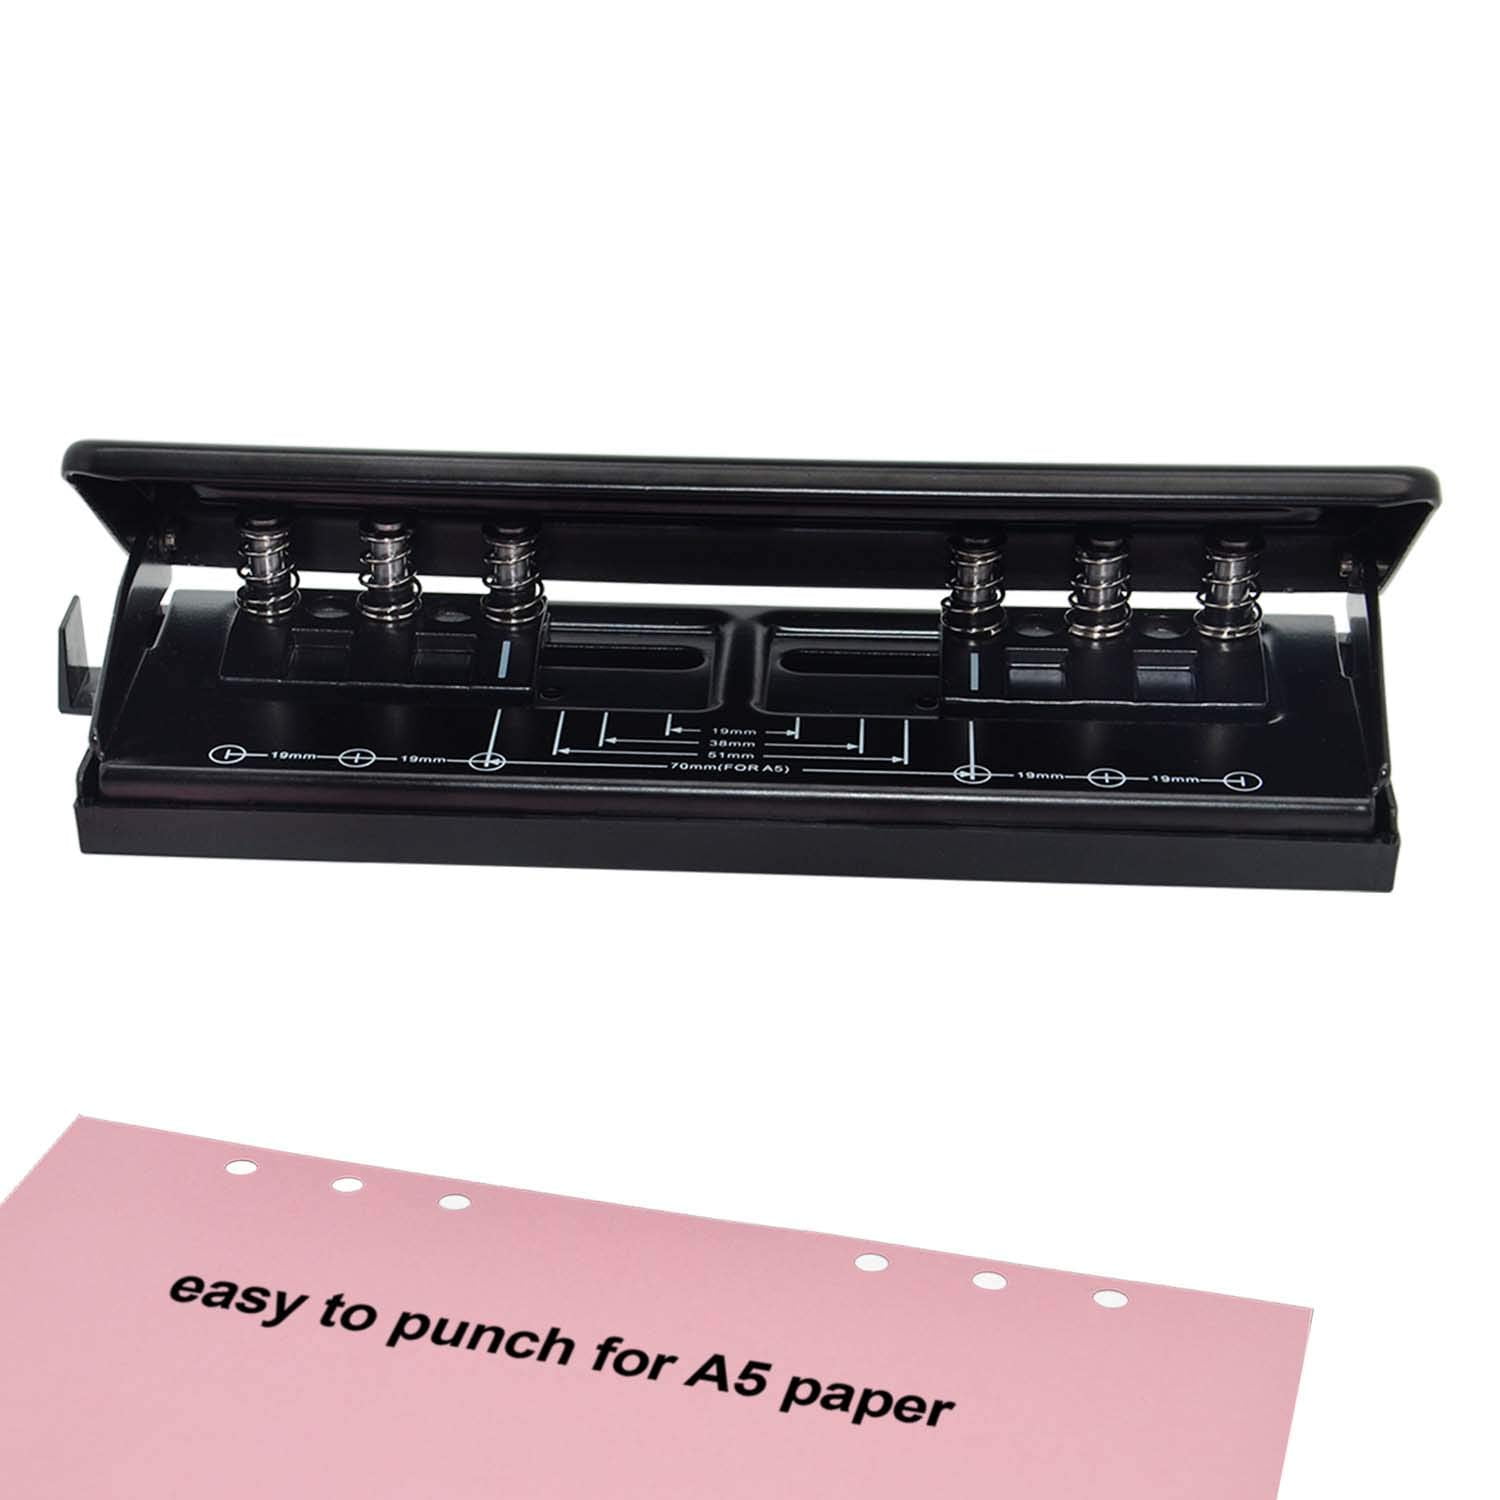 Good Adjustable 6-Hole Desktop Punch Puncher with 6 Sheet Capacity  Organizer Six Ring Binder for A4 A5 A6 B7 Dairy Planner